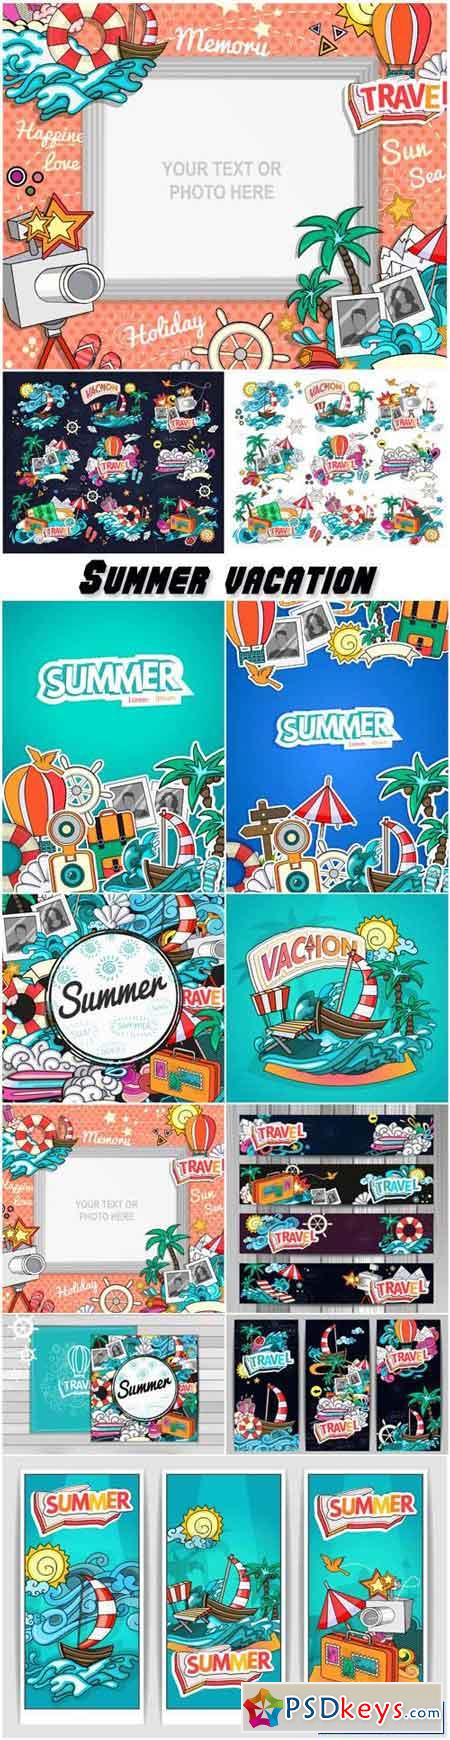 Summer vacation, frames and backgrounds vector